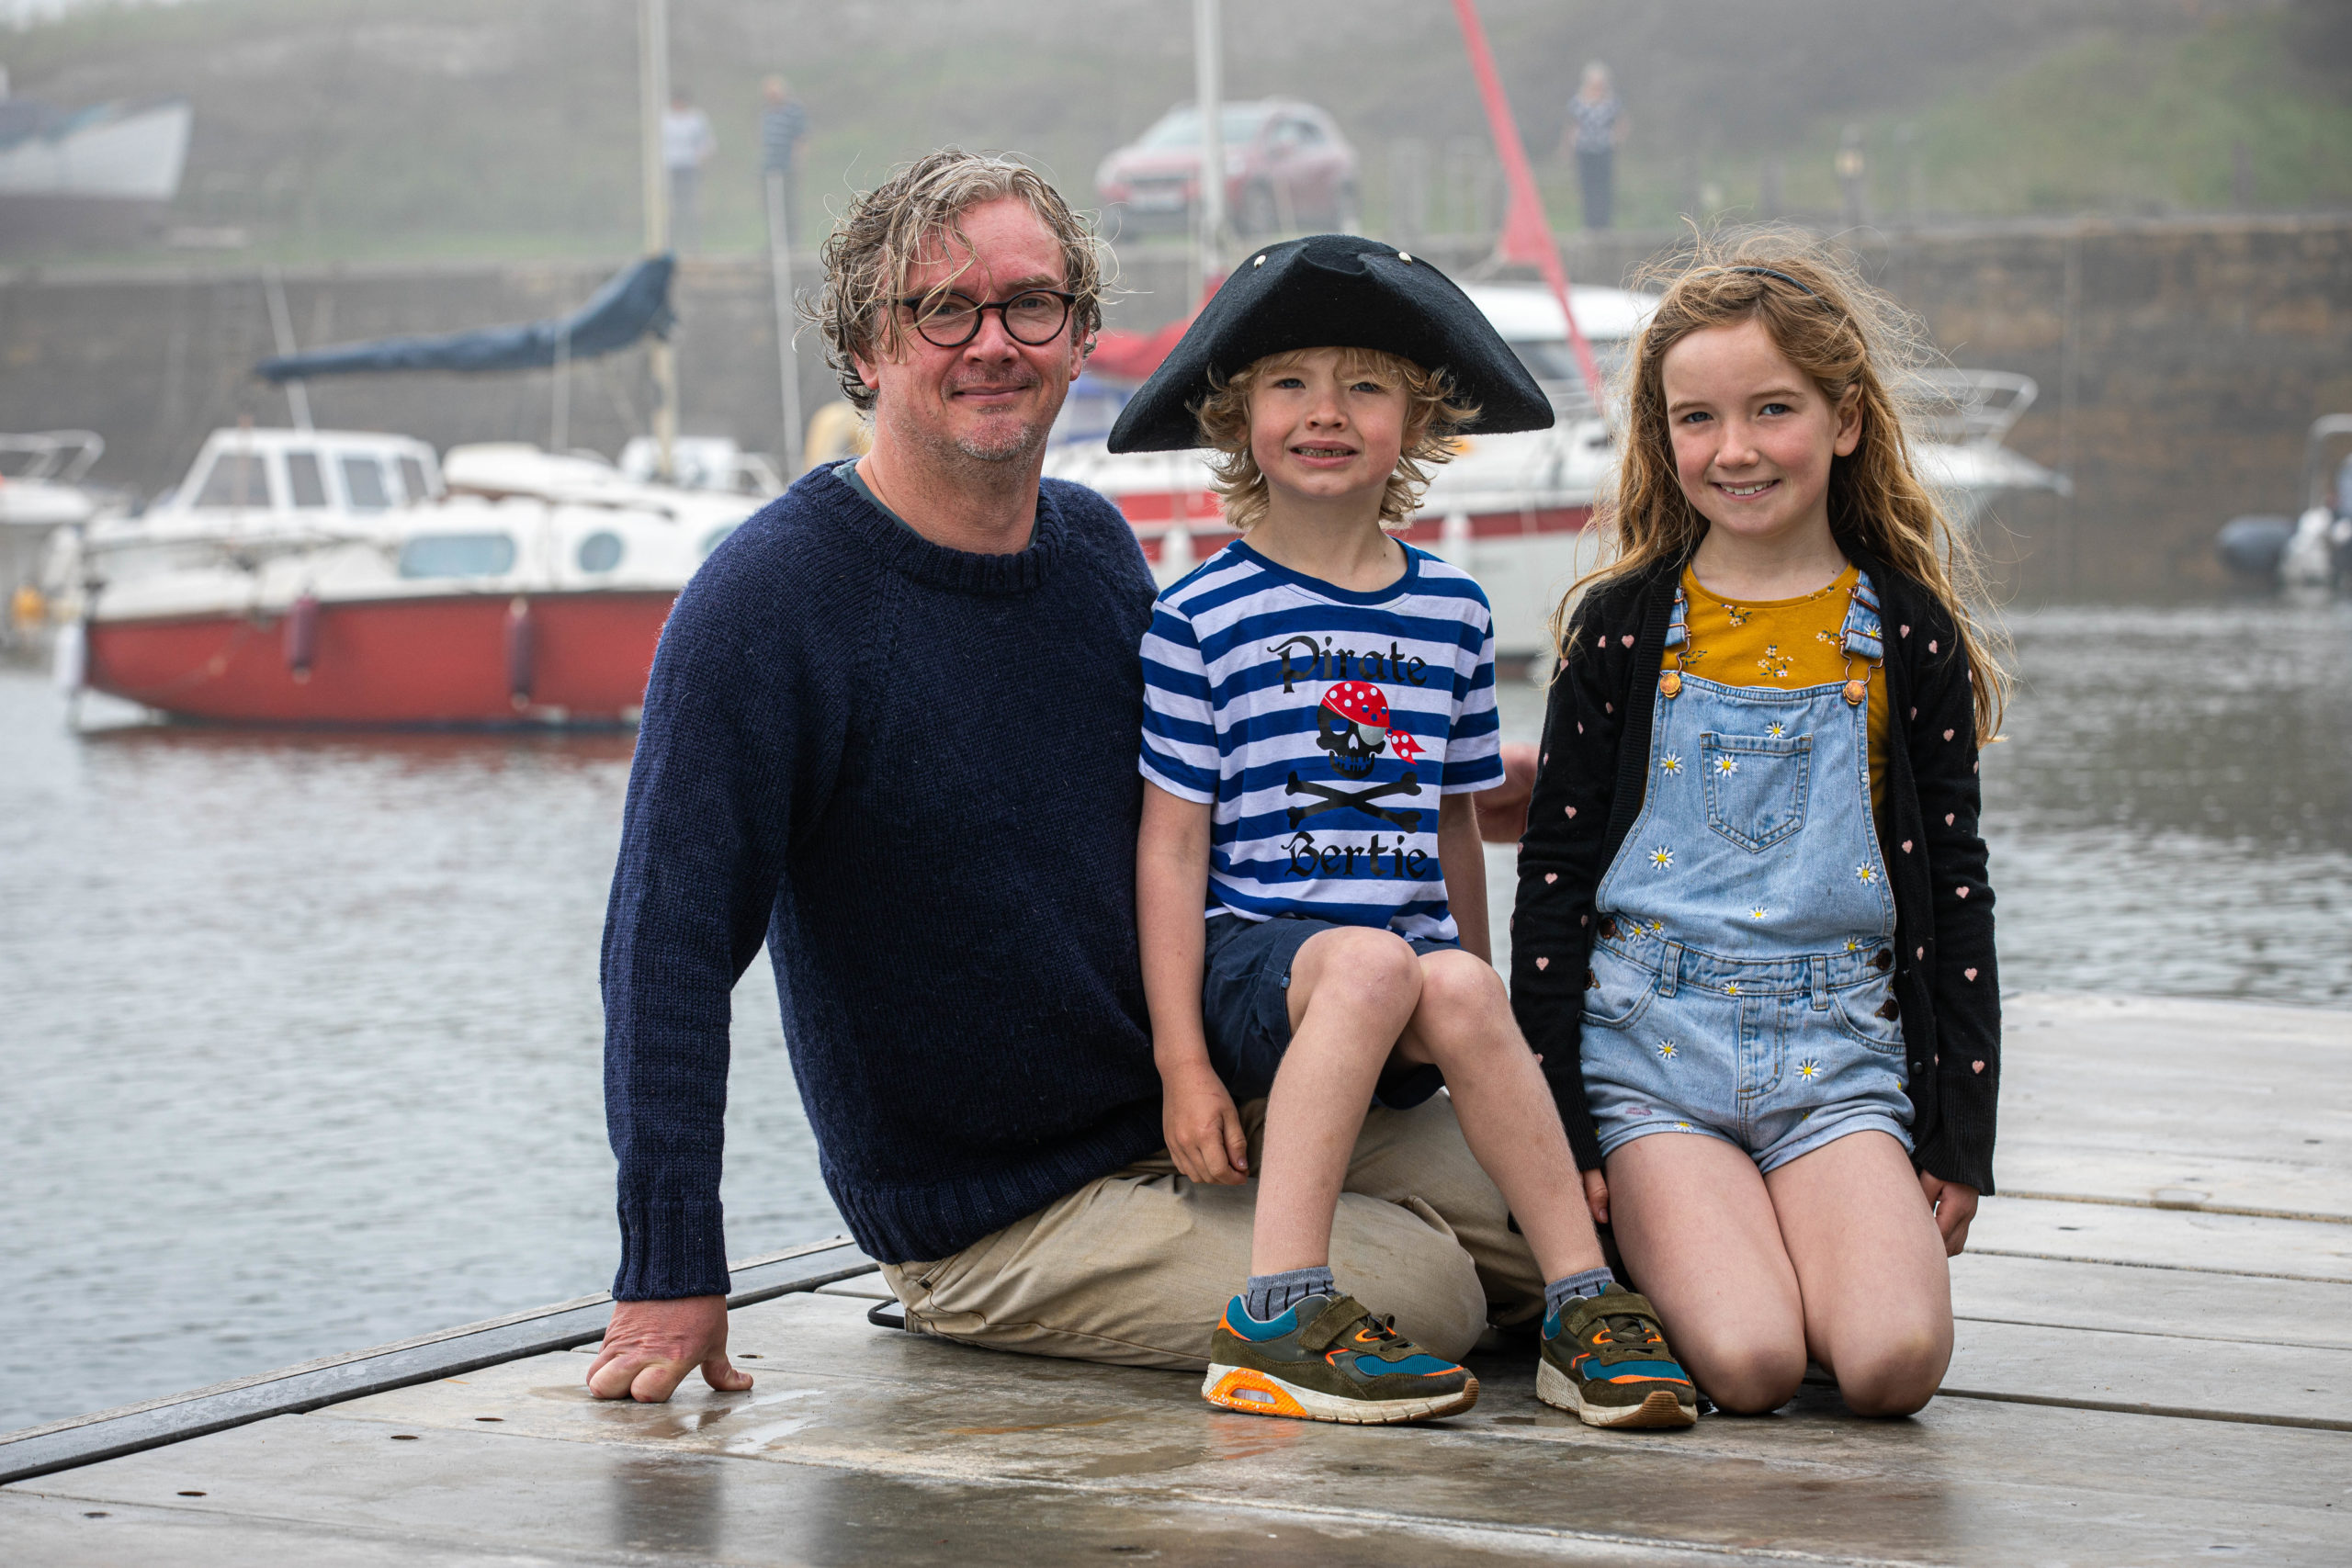 Bertie the Pirate creator Steve Blair with his sailing mad children Cicely and Bertie.